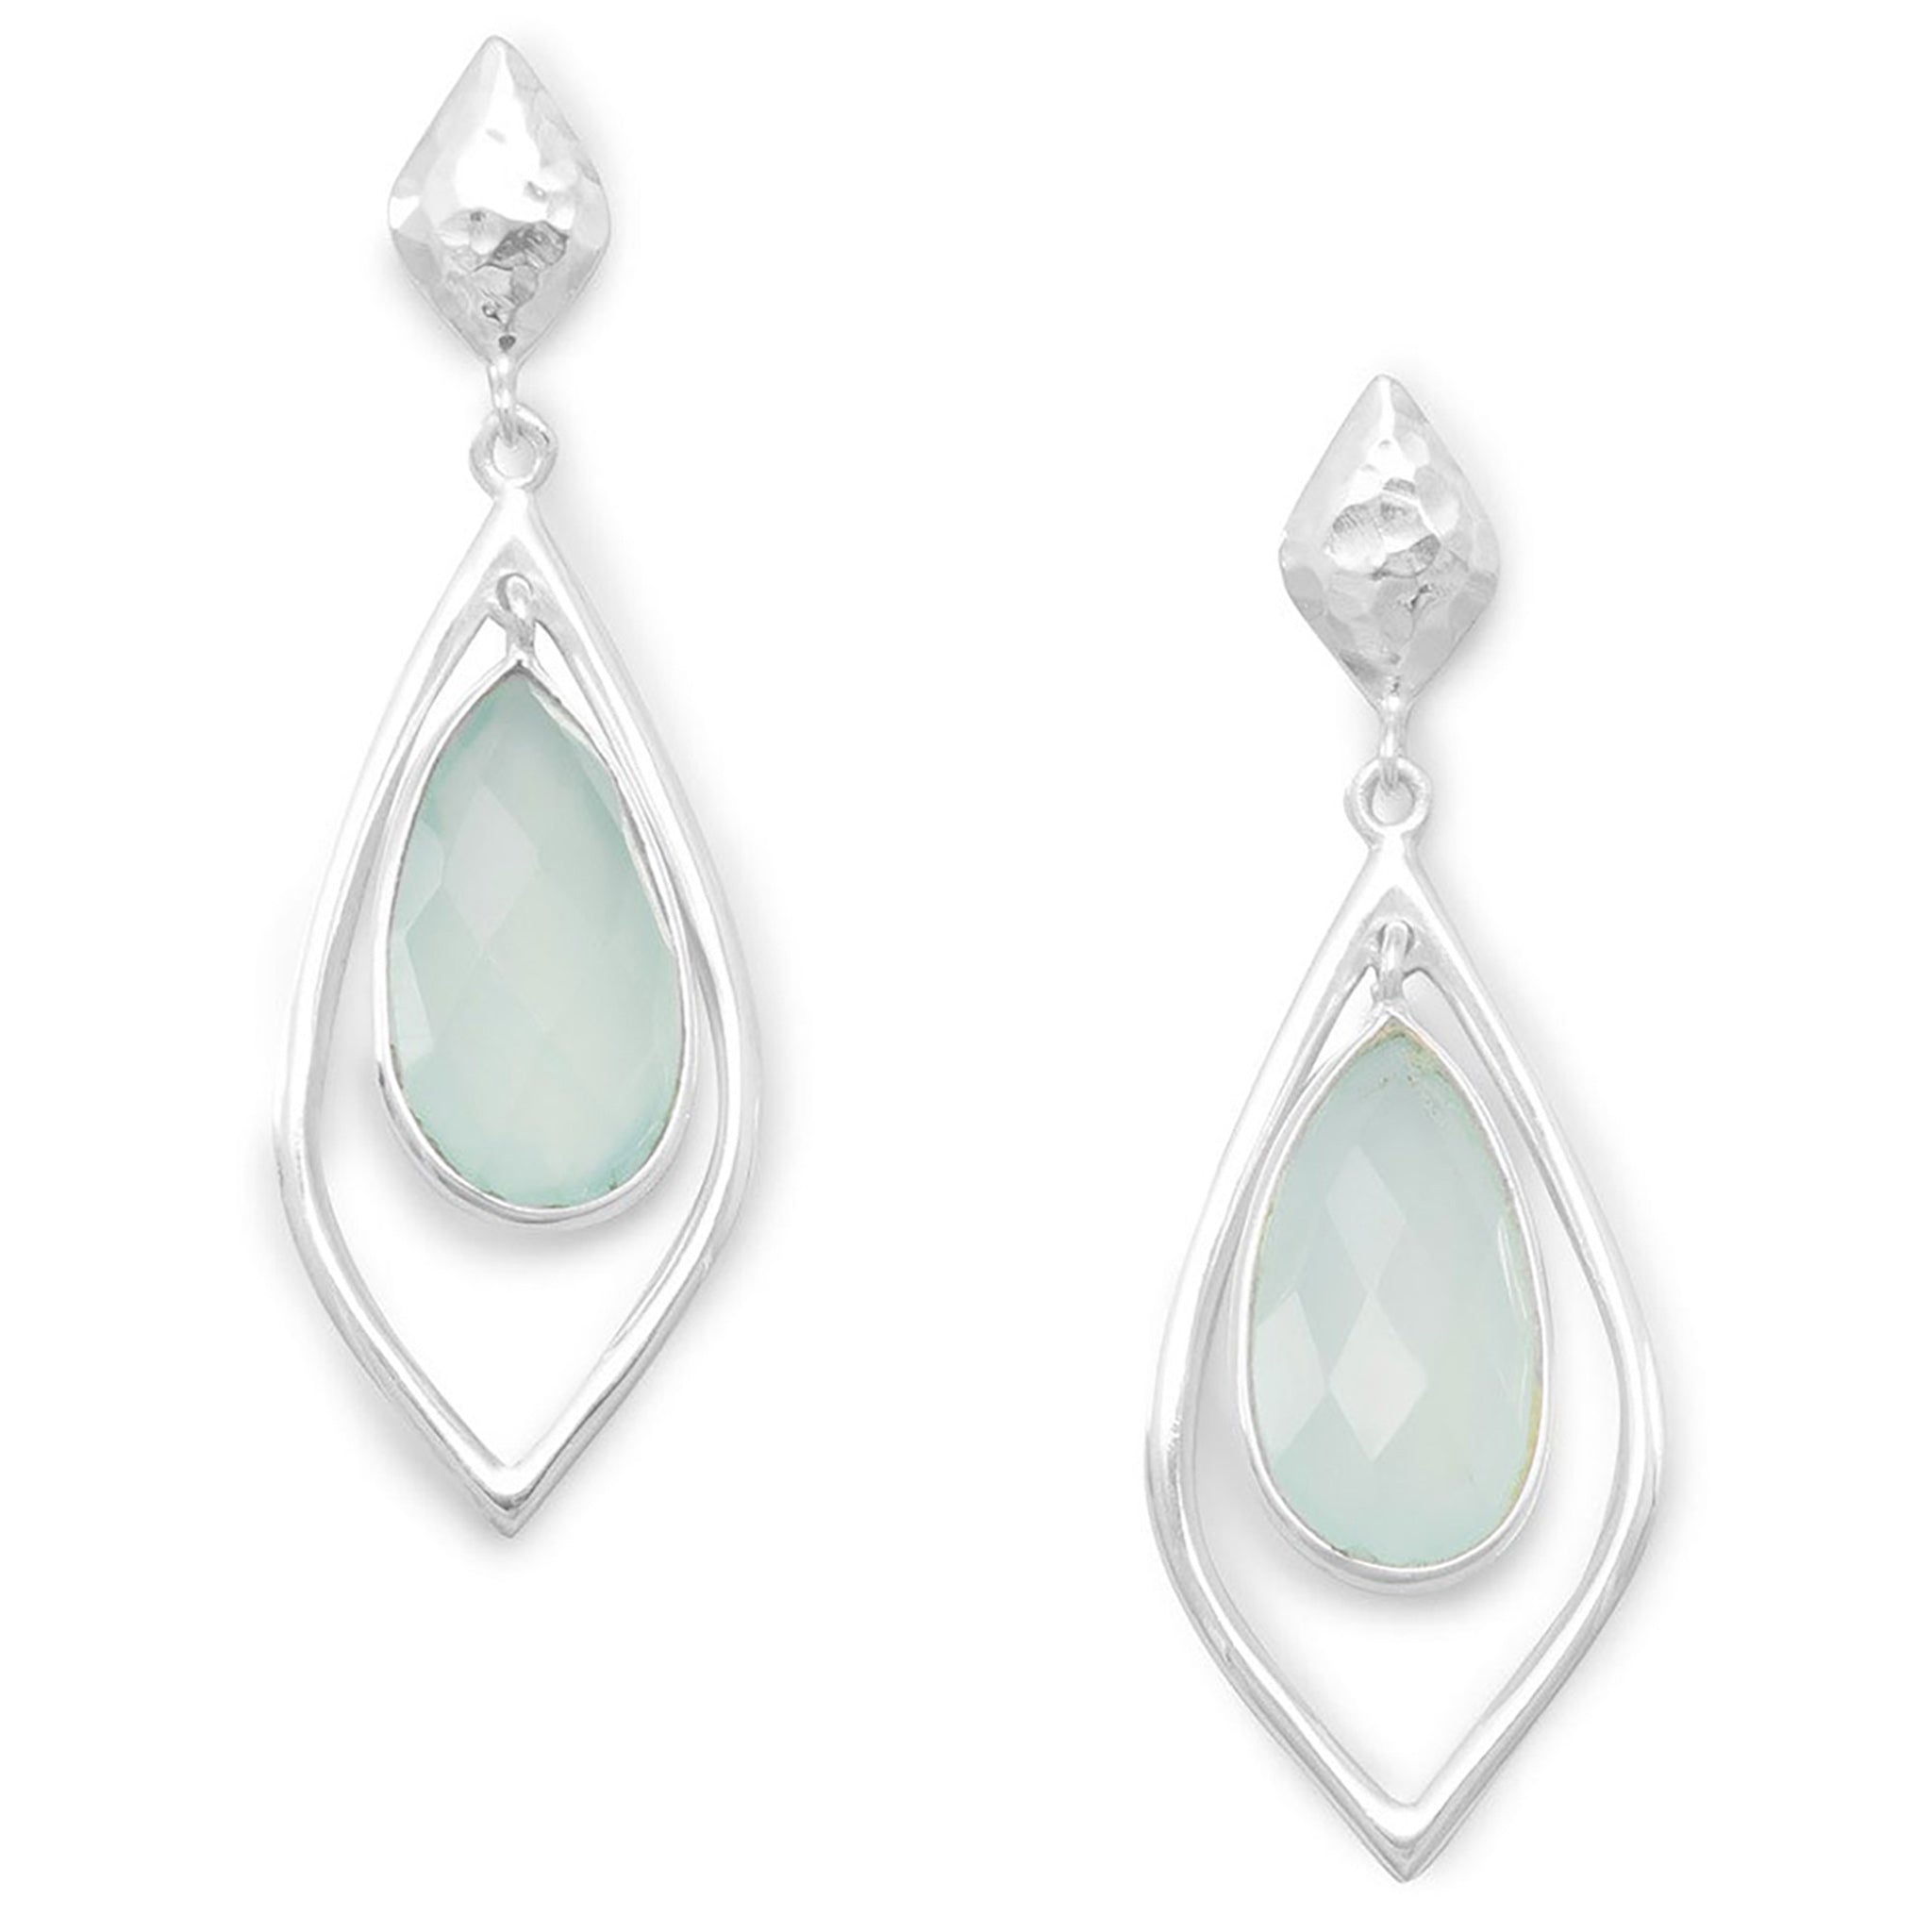 Hammered Silver Chalcedony Earrings